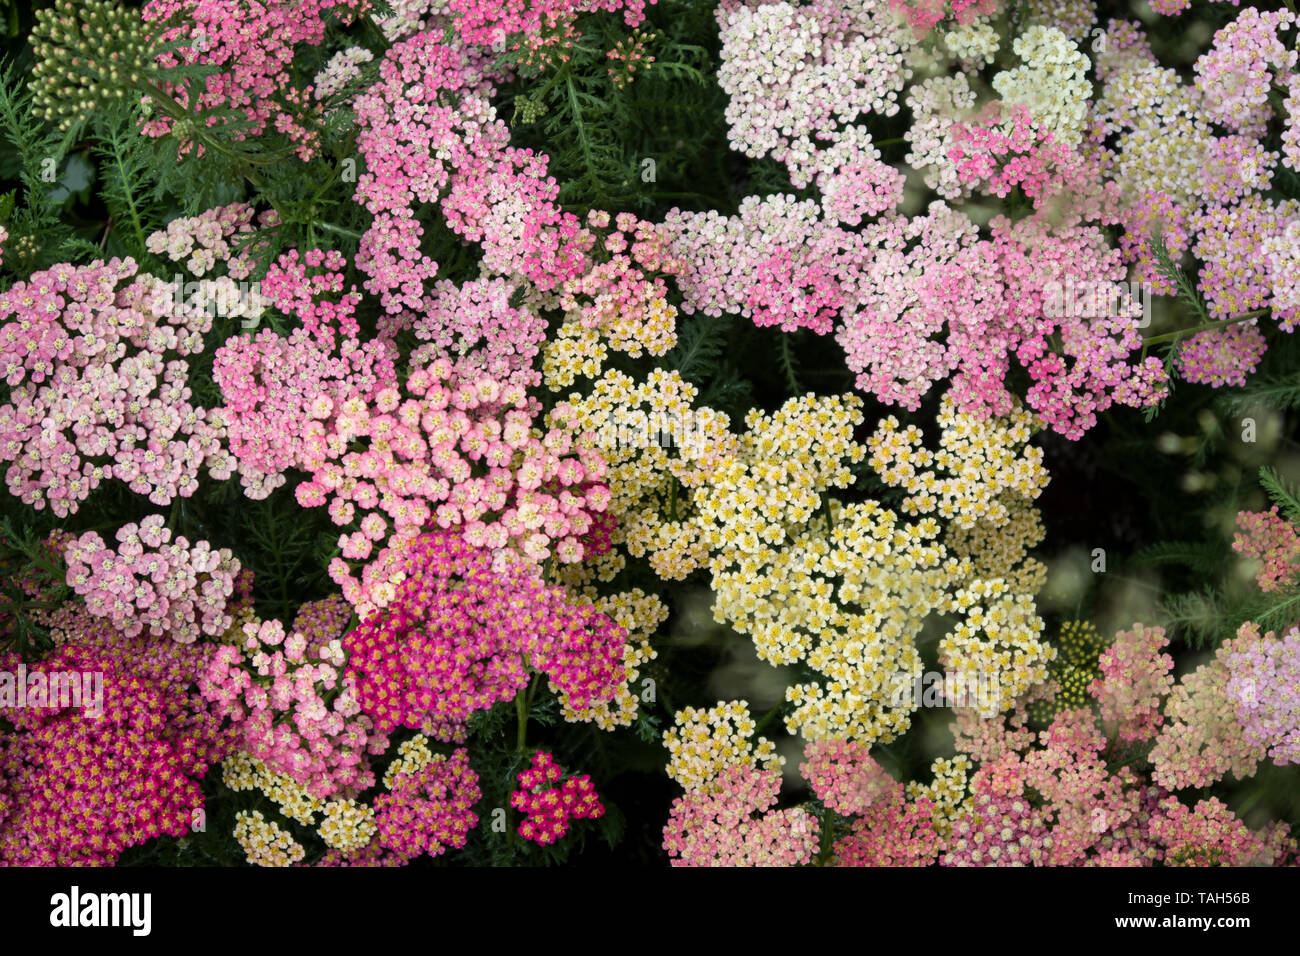 Multicolored sedum in a flowerbed as a decoration Stock Photo